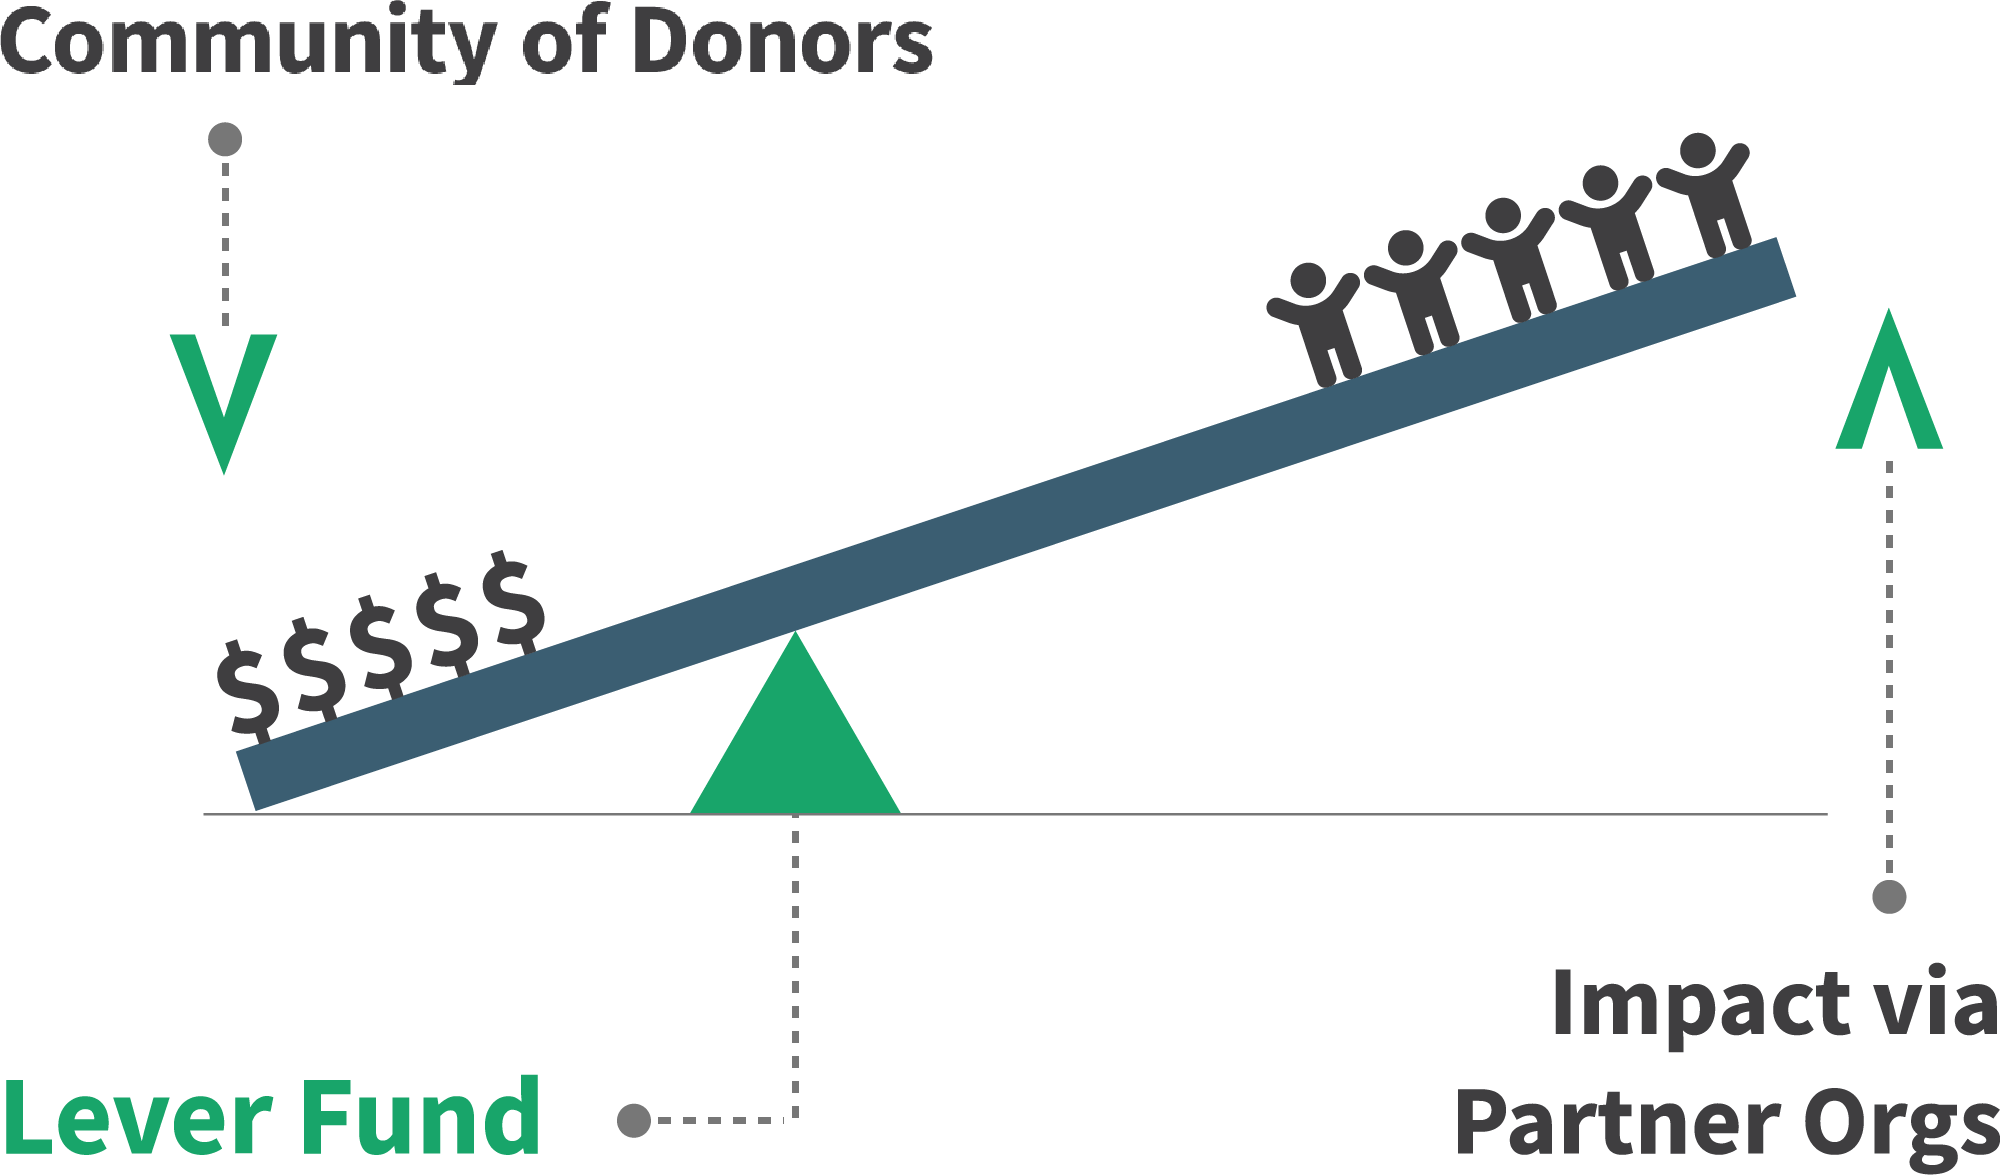 The impact of a community of donors via a partner organization and Lever Fund - stage 5